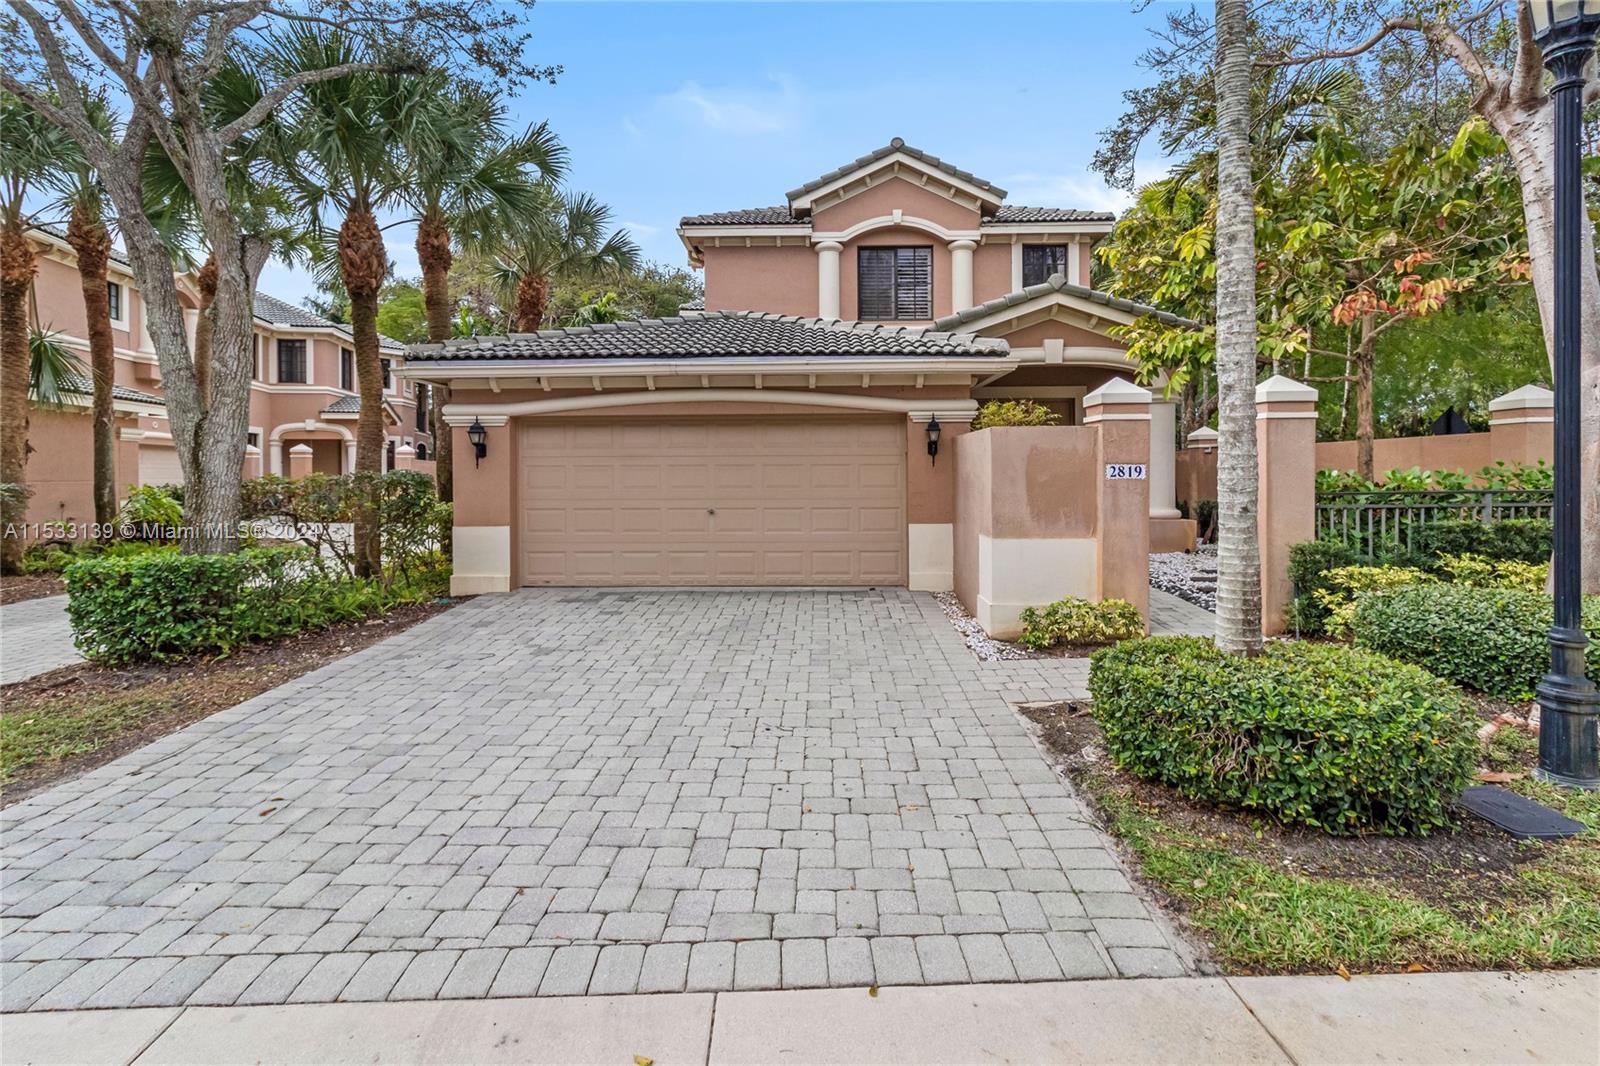 2819 Center Court Drive 2-26, Weston, Florida 33332, 3 Bedrooms Bedrooms, ,2 BathroomsBathrooms,Residential,For Sale,2819 Center Court Drive 2-26,A11533139